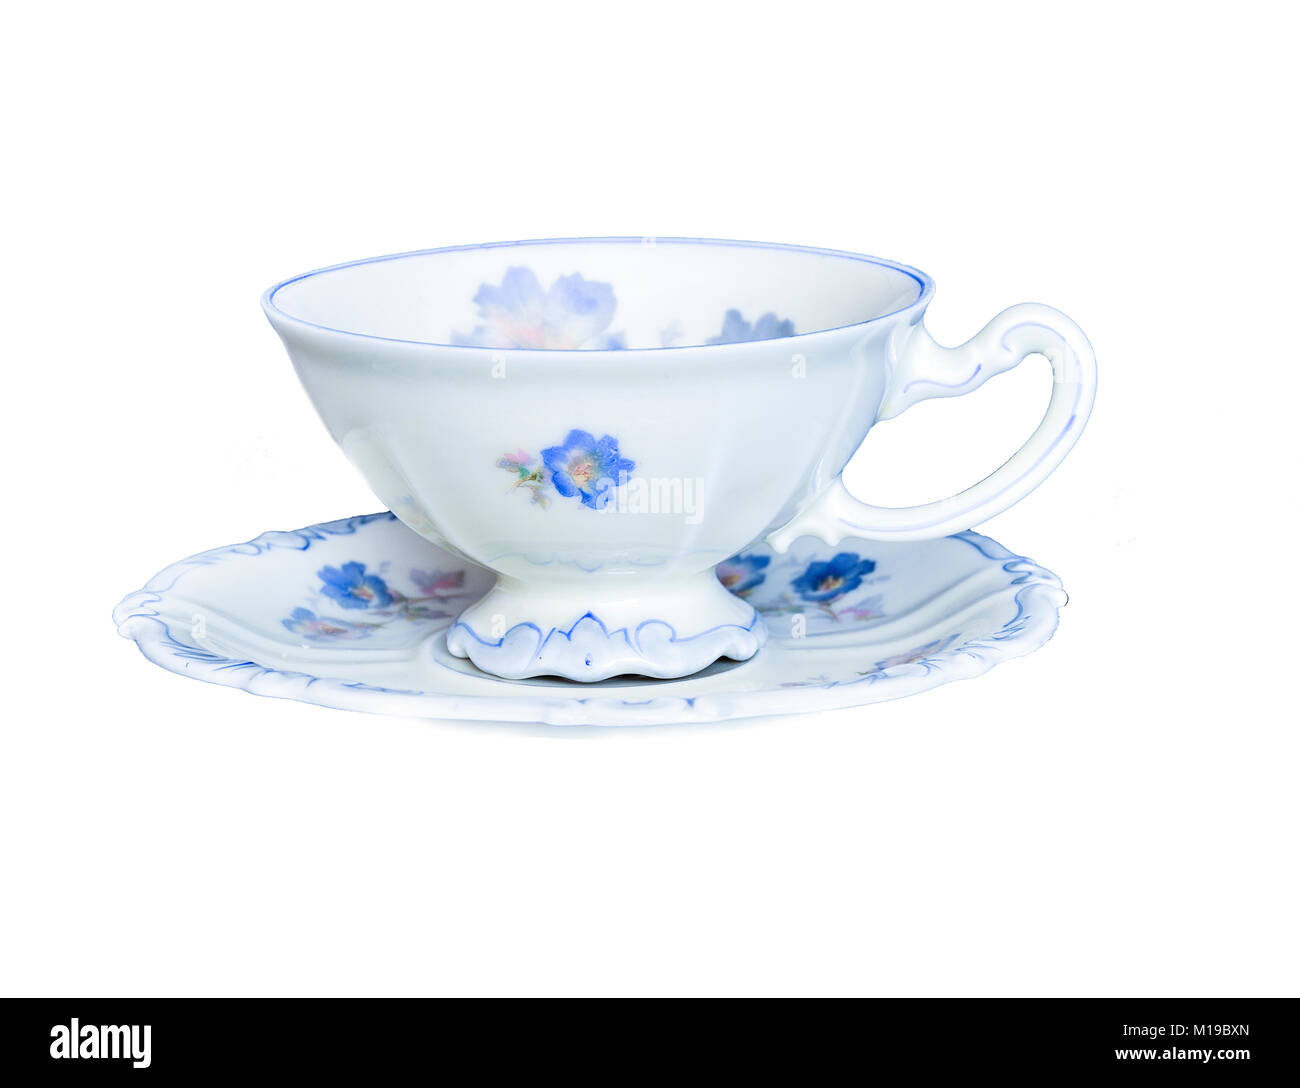 Vintage antique elegant porcelain tea cup on saucer isolated on a white background isolated Stock Photo